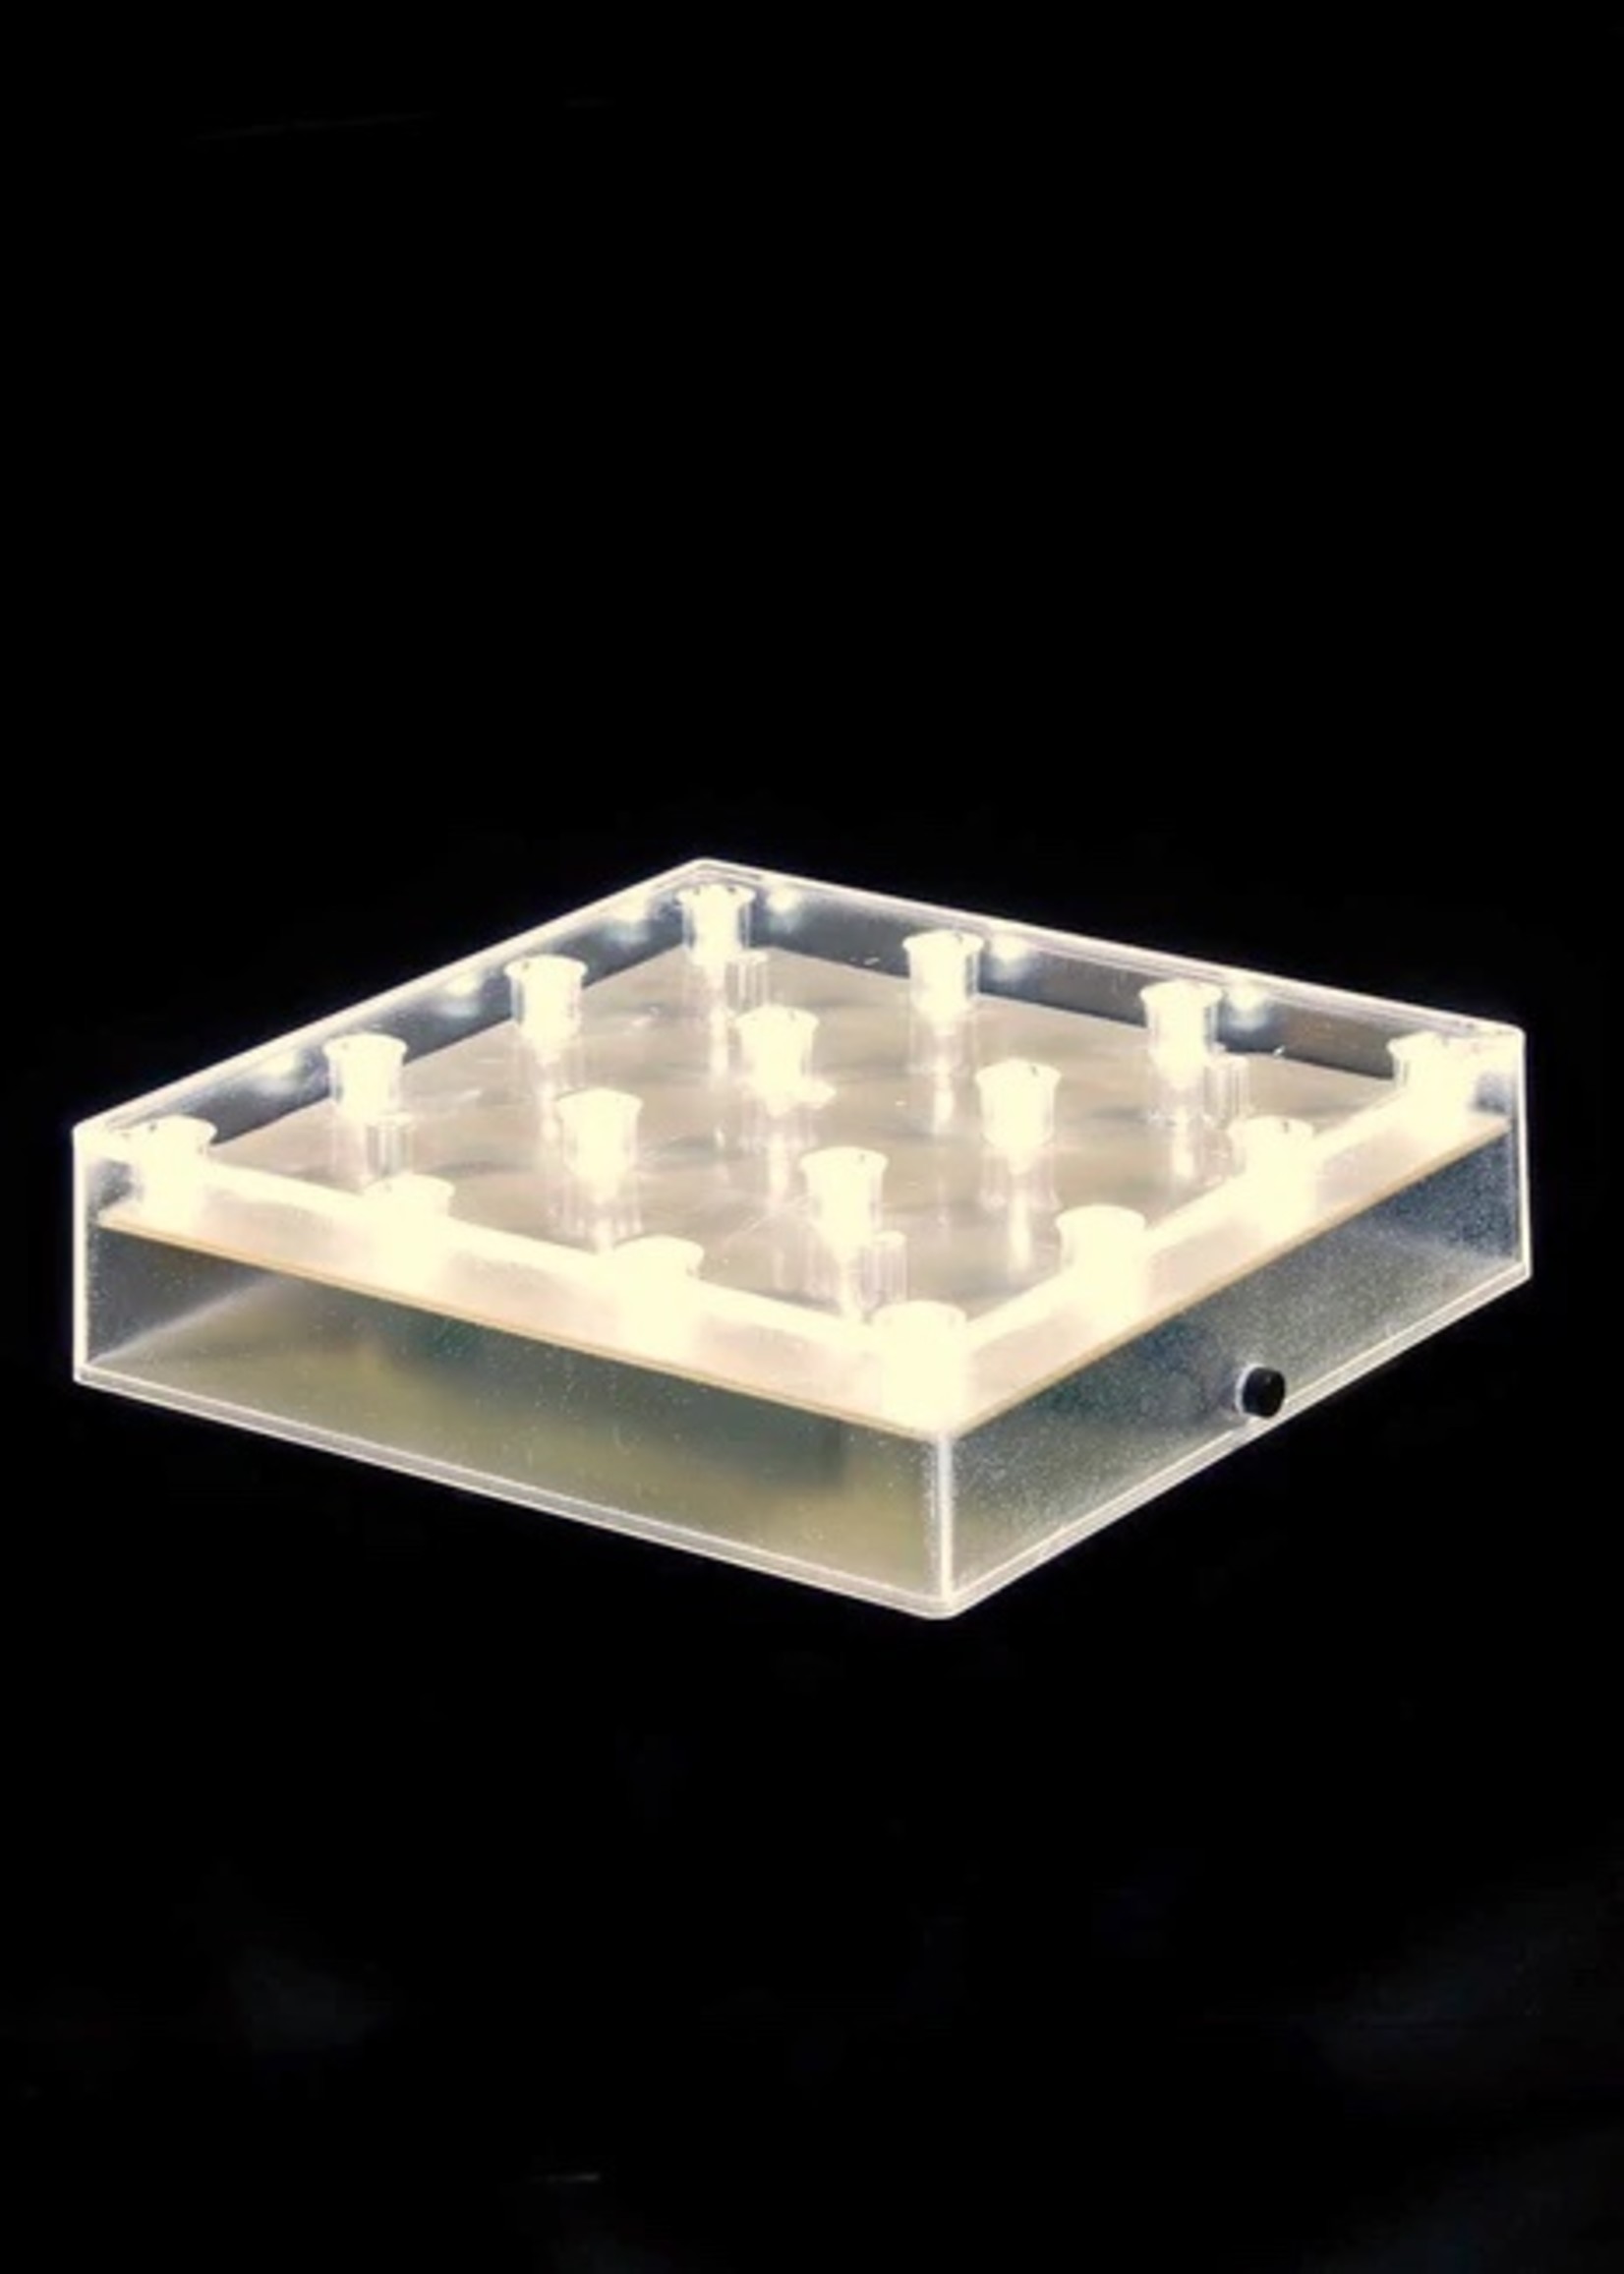 Warm 5" Square Base with Lights